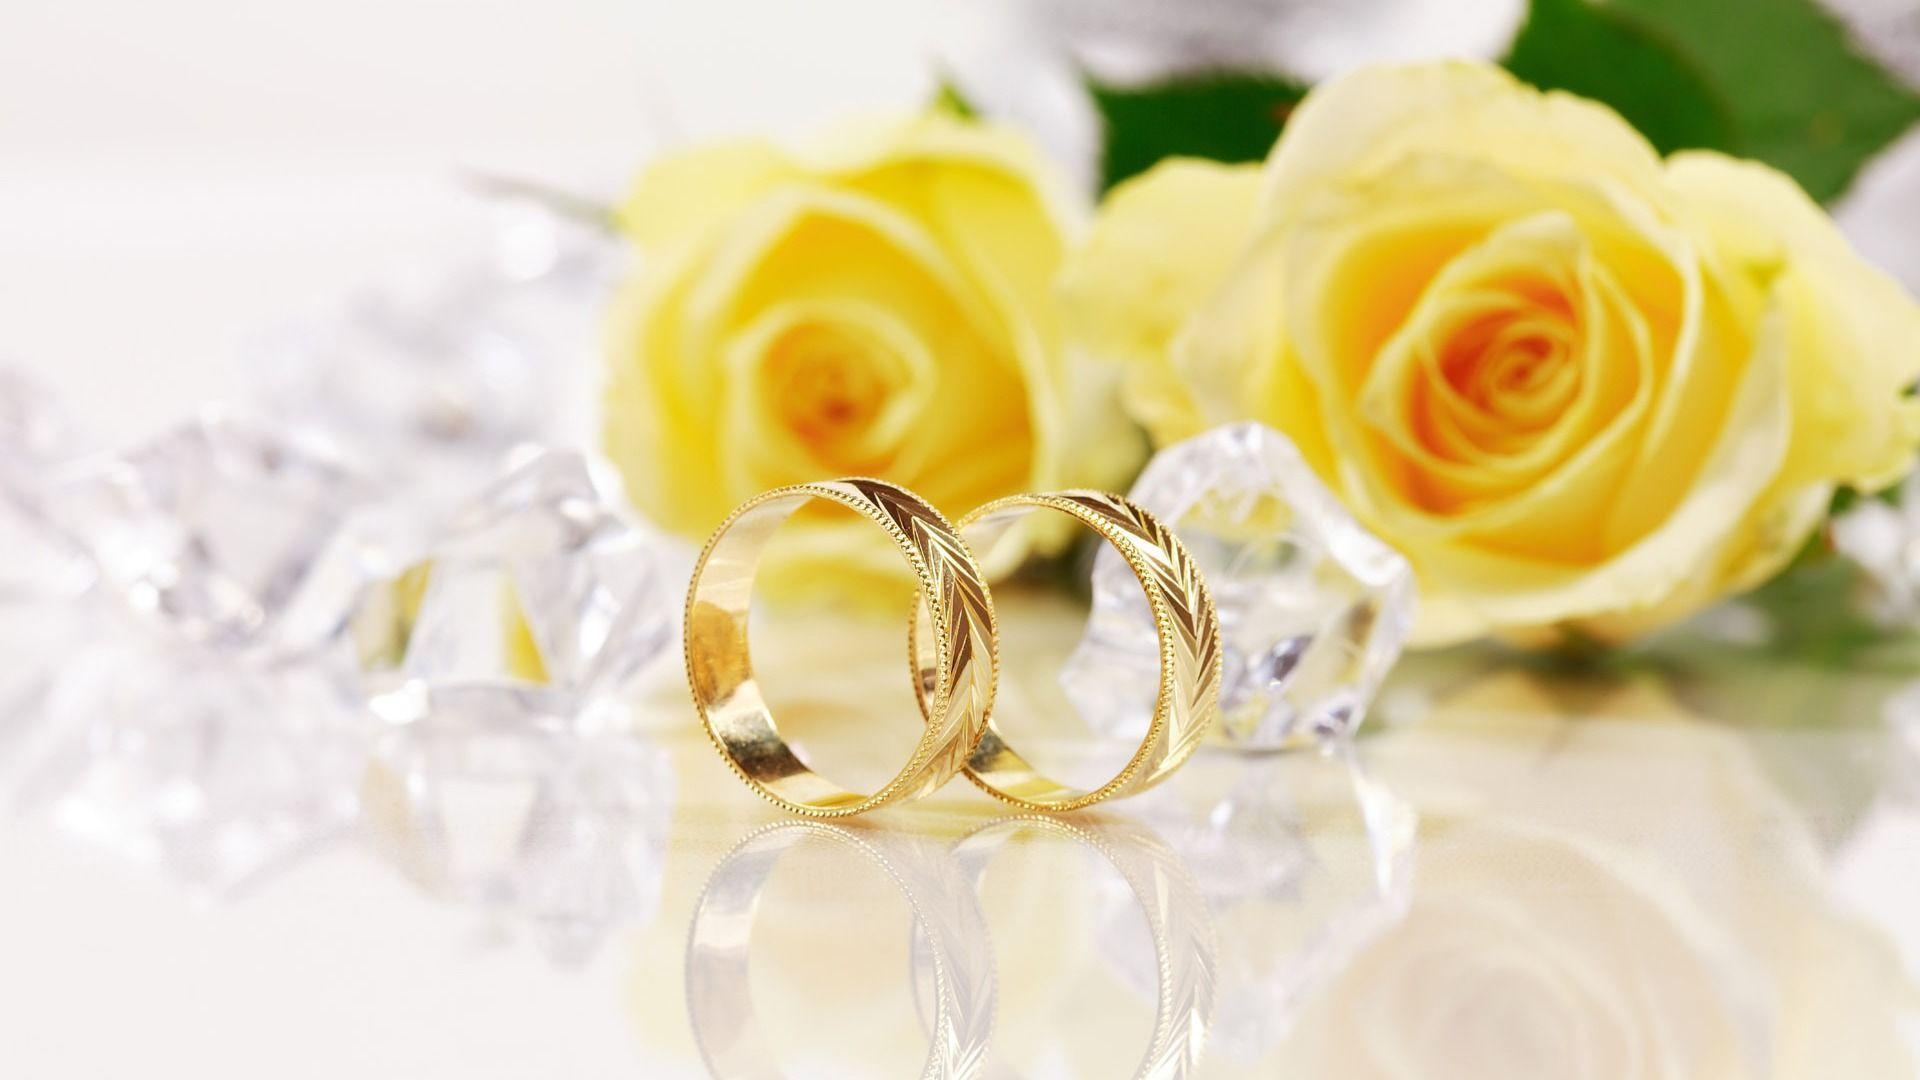 Wedding Rings And Flowers Background